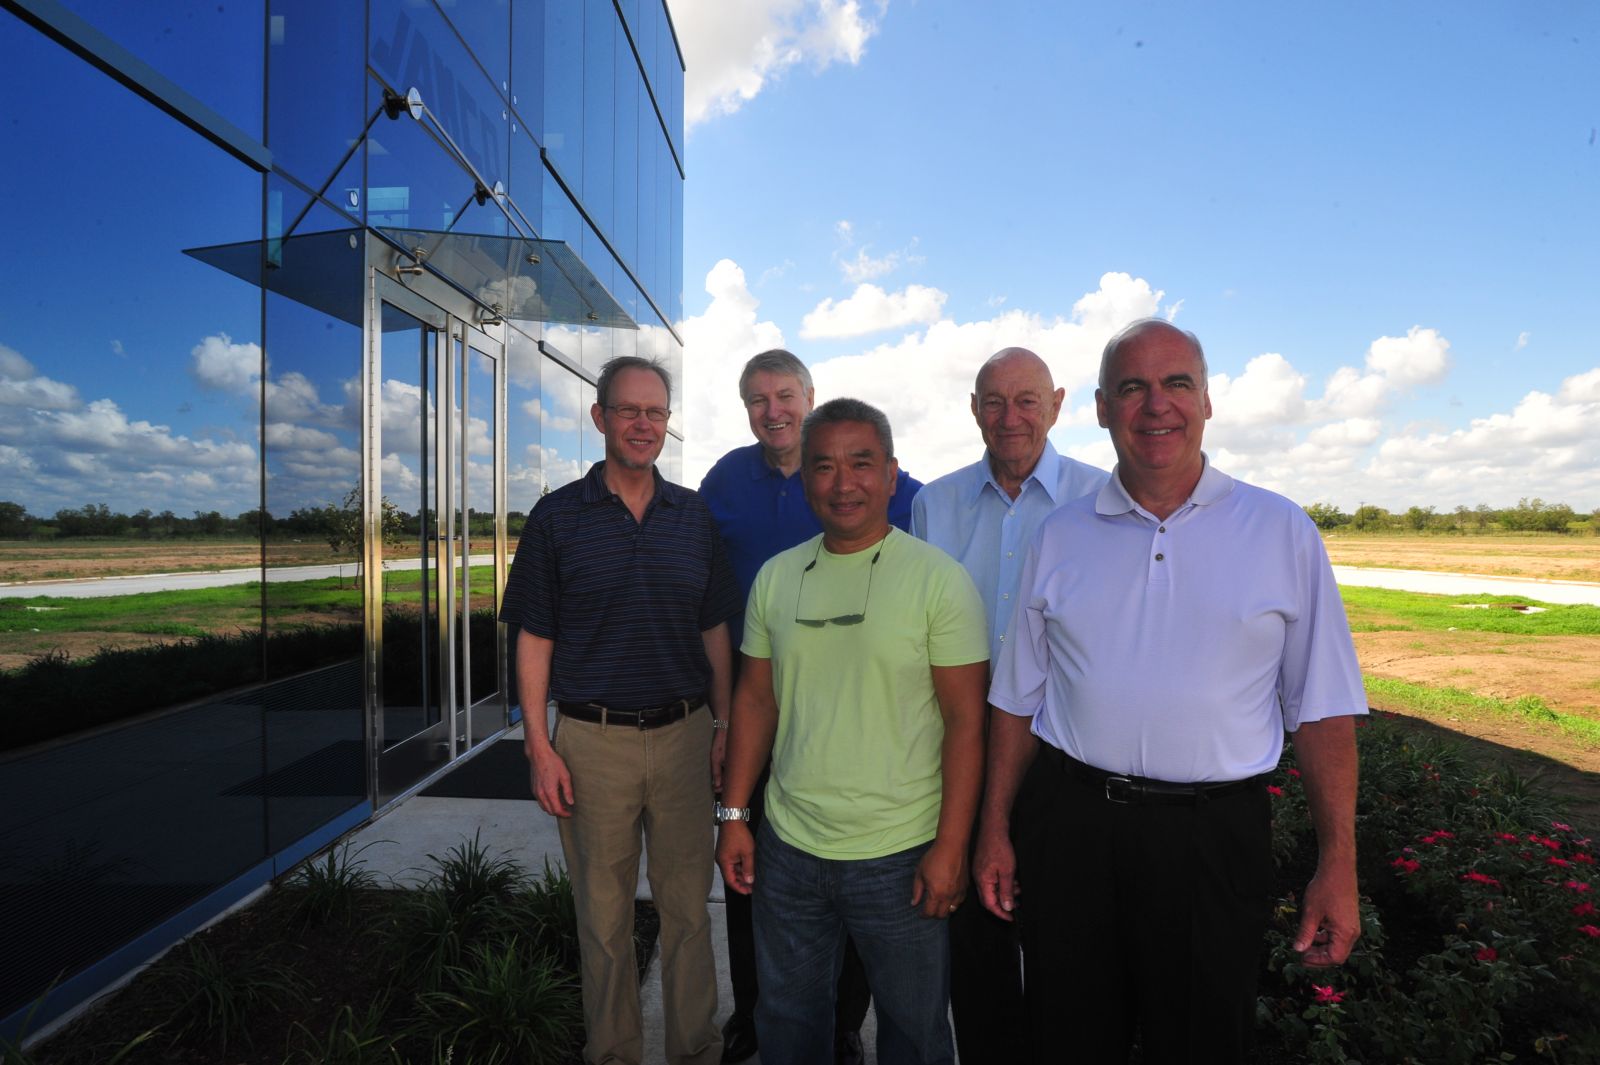 From left to right: Willie Johnson (owner), Phil Reames (CFO), Van Nguyen (Exec VP), George Johnson Sr. (owner), and Phil Greeves (Pres and CEO). (Photo by Terry Hagerty Photography)